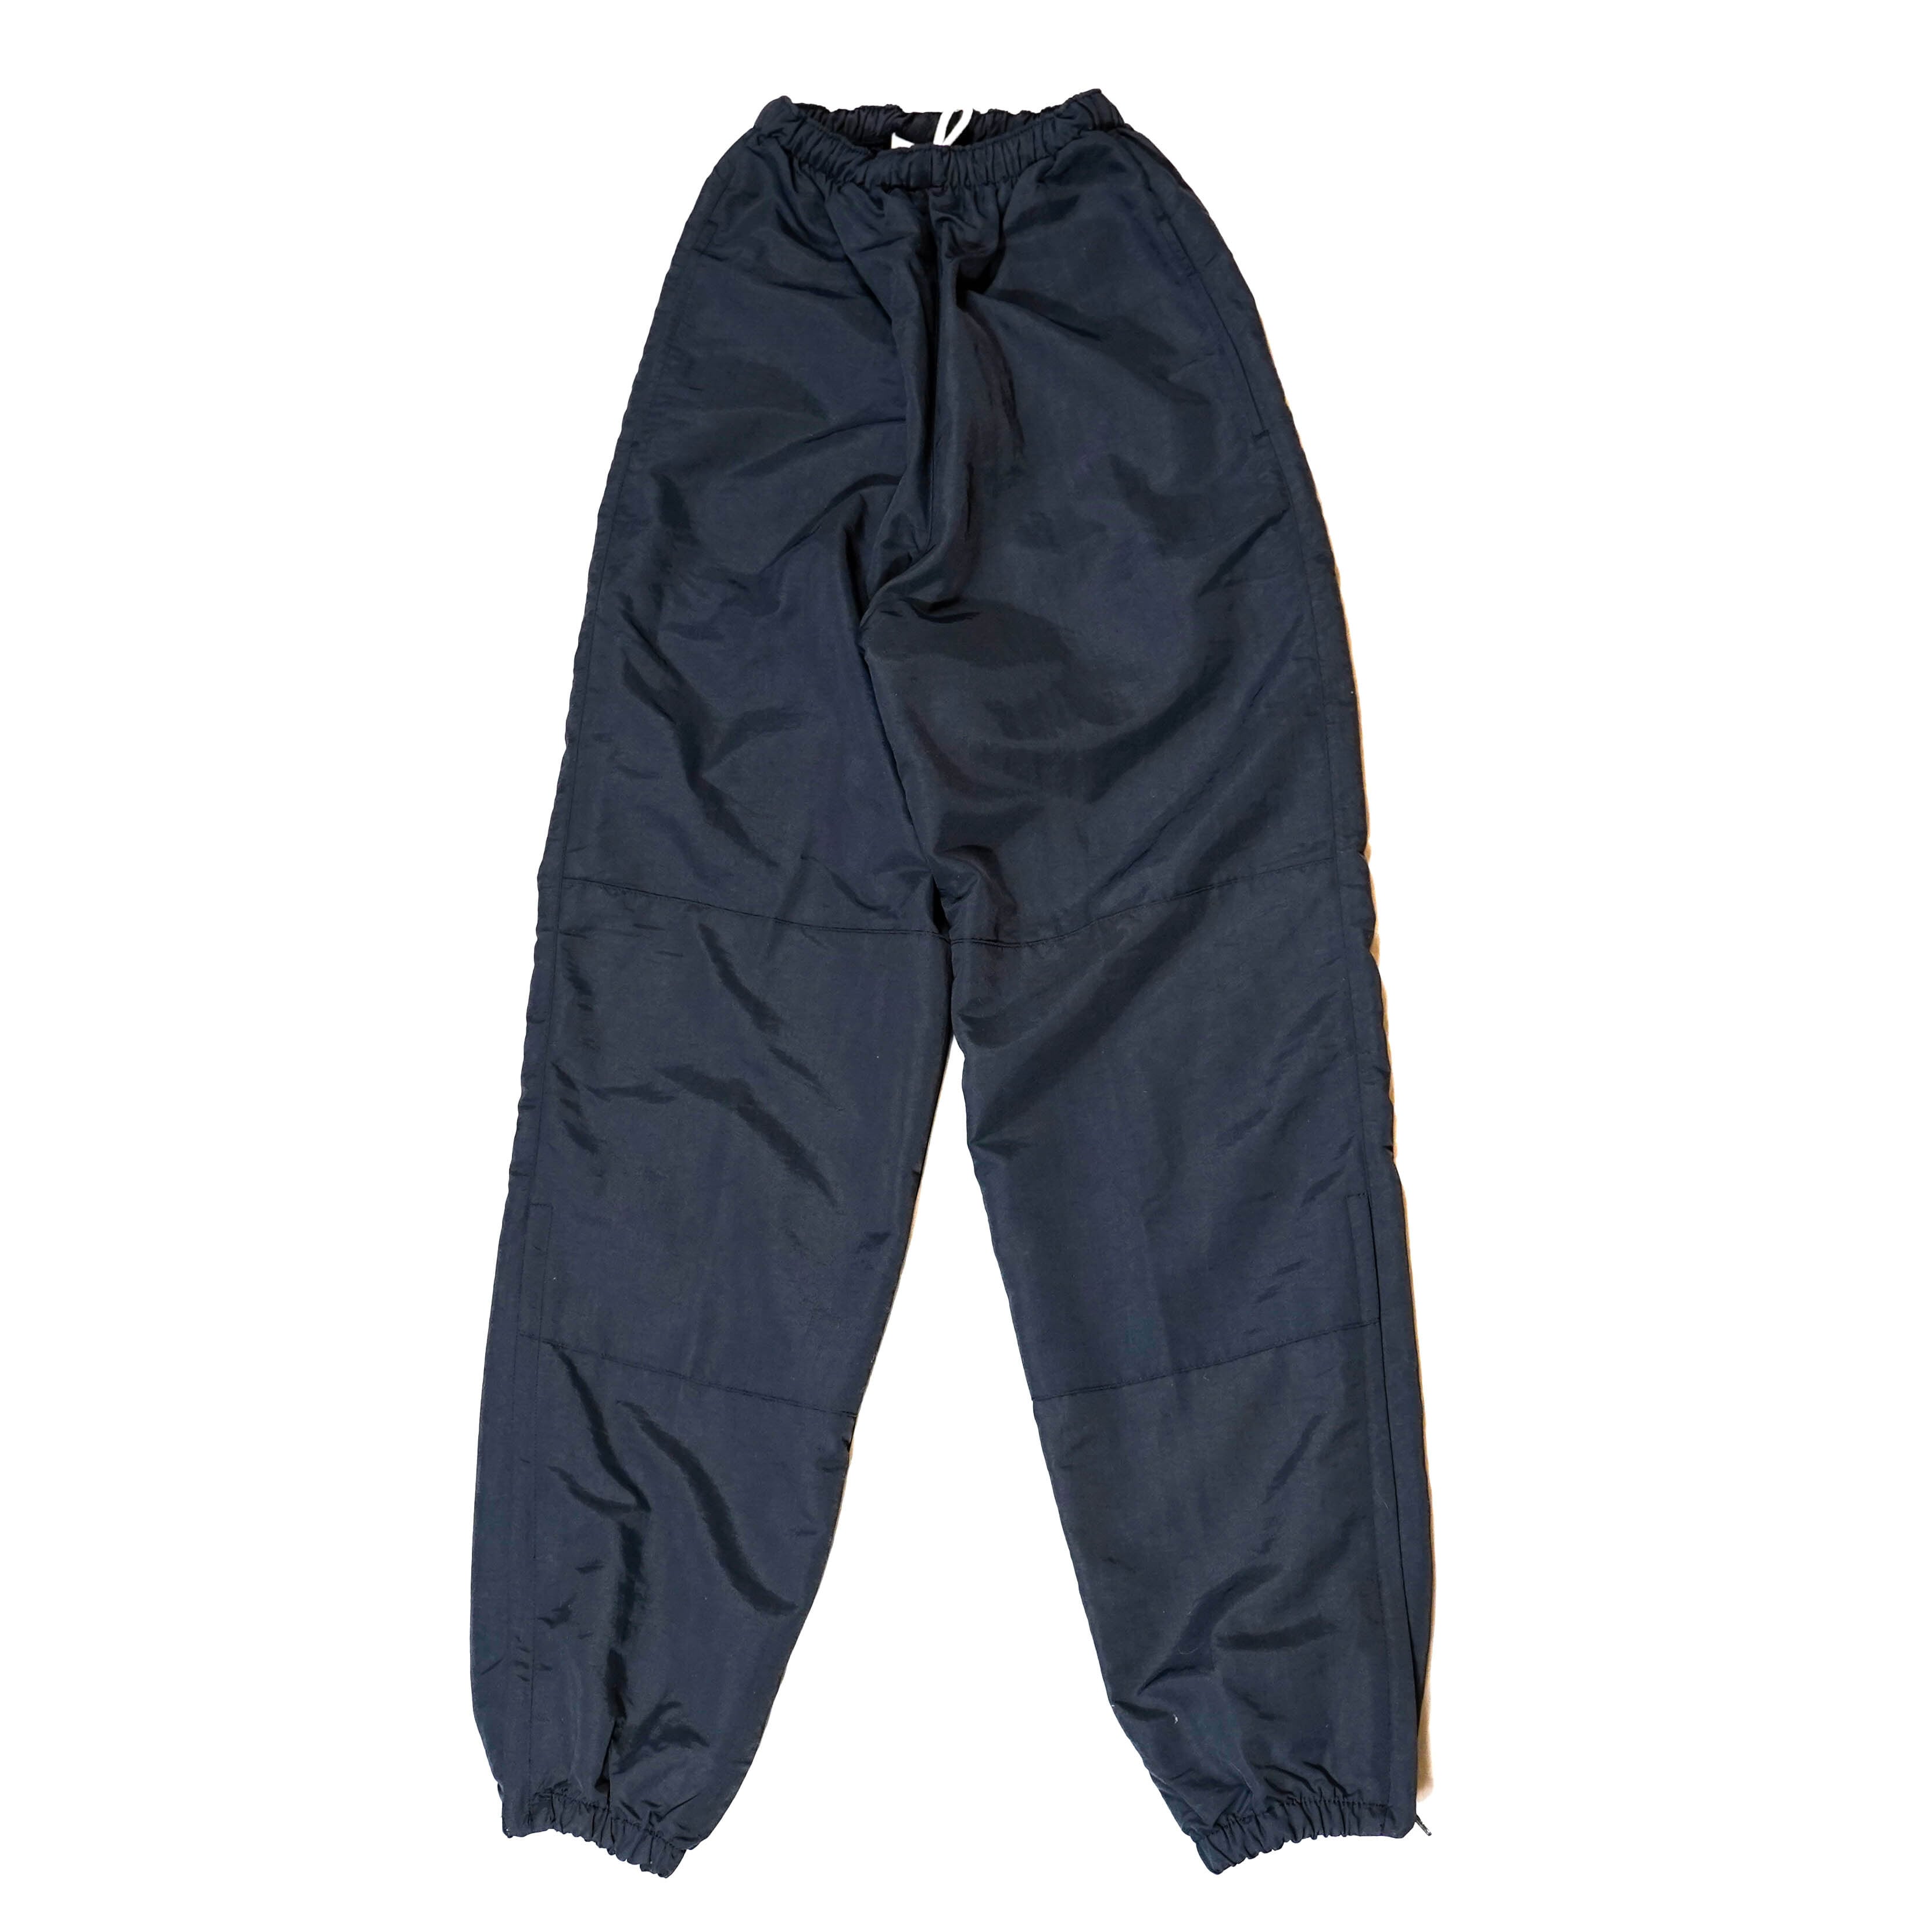 Dead stock U.S.ARMY IPFU Trading pants made in USA【XS-L】アメリカ 